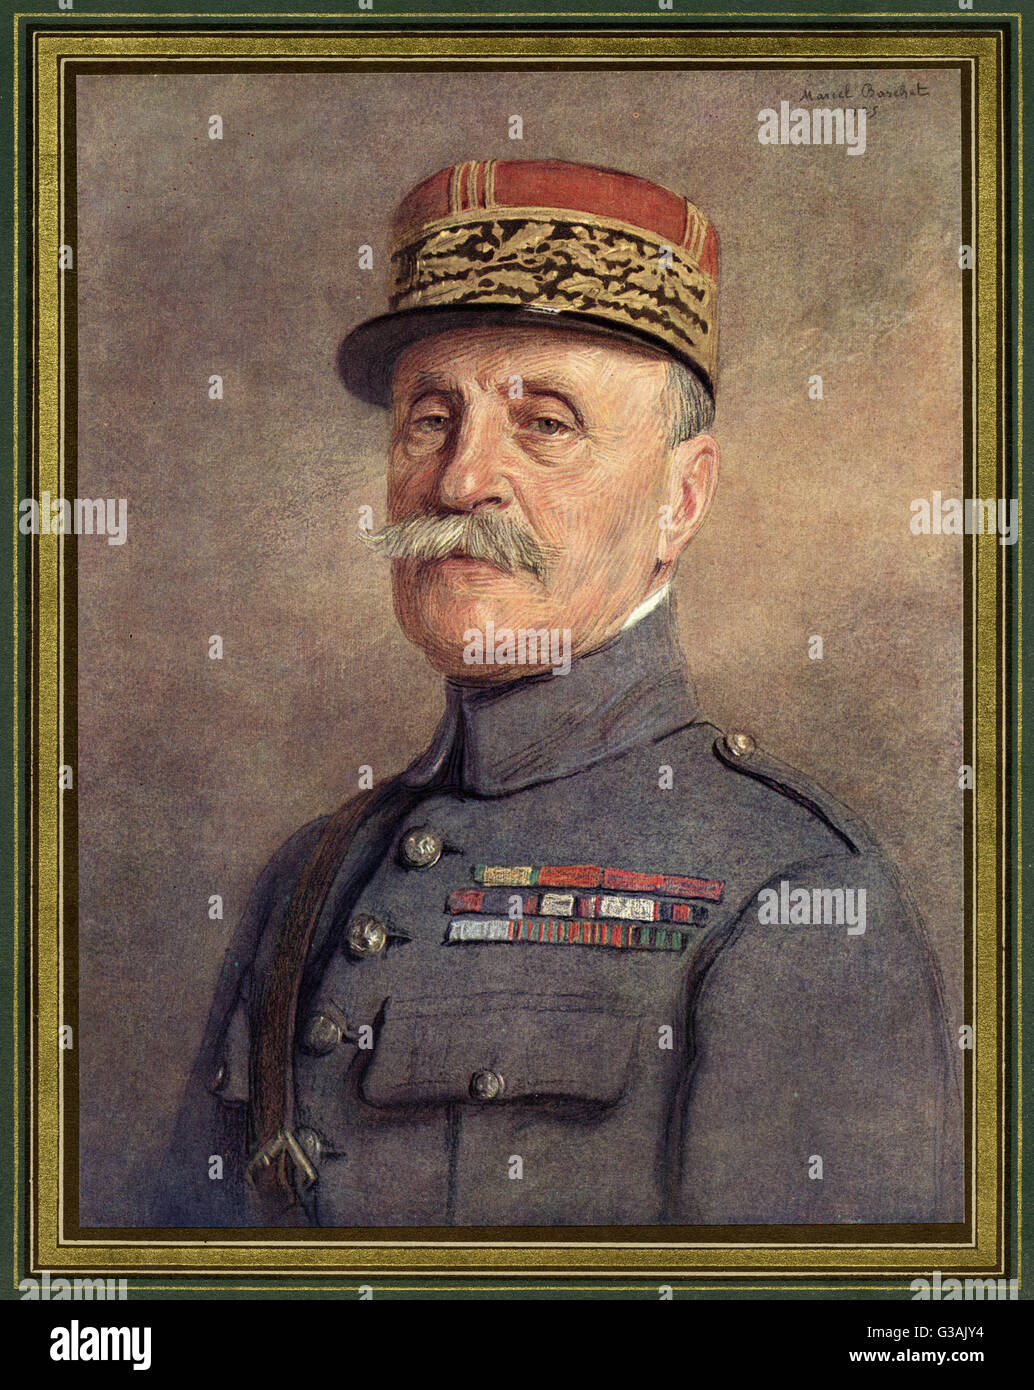 Ferdinand Foch (1851-1929) - French general (Marechal) and military theorist who served as the Supreme Allied Commander during the First World War. Stock Photo